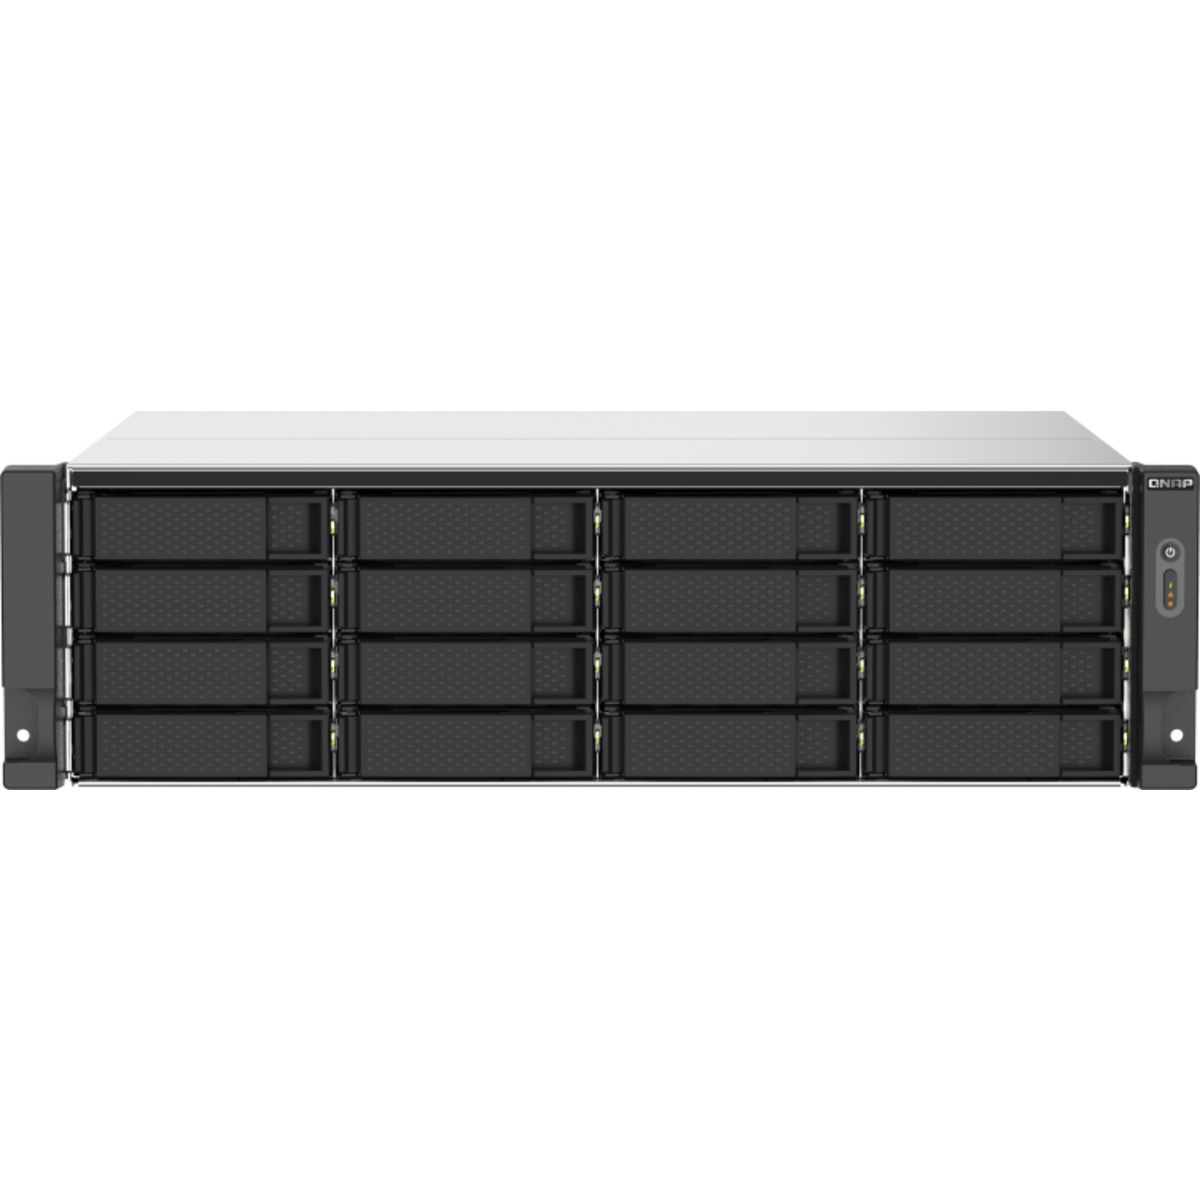 QNAP TS-1673AU-RP 264tb 16-Bay RackMount Multimedia / Power User / Business NAS - Network Attached Storage Device 12x22tb Western Digital Ultrastar HC580 SED WUH722422ALE6L1 3.5 7200rpm SATA 6Gb/s HDD ENTERPRISE Class Drives Installed - Burn-In Tested - FREE RAM UPGRADE TS-1673AU-RP